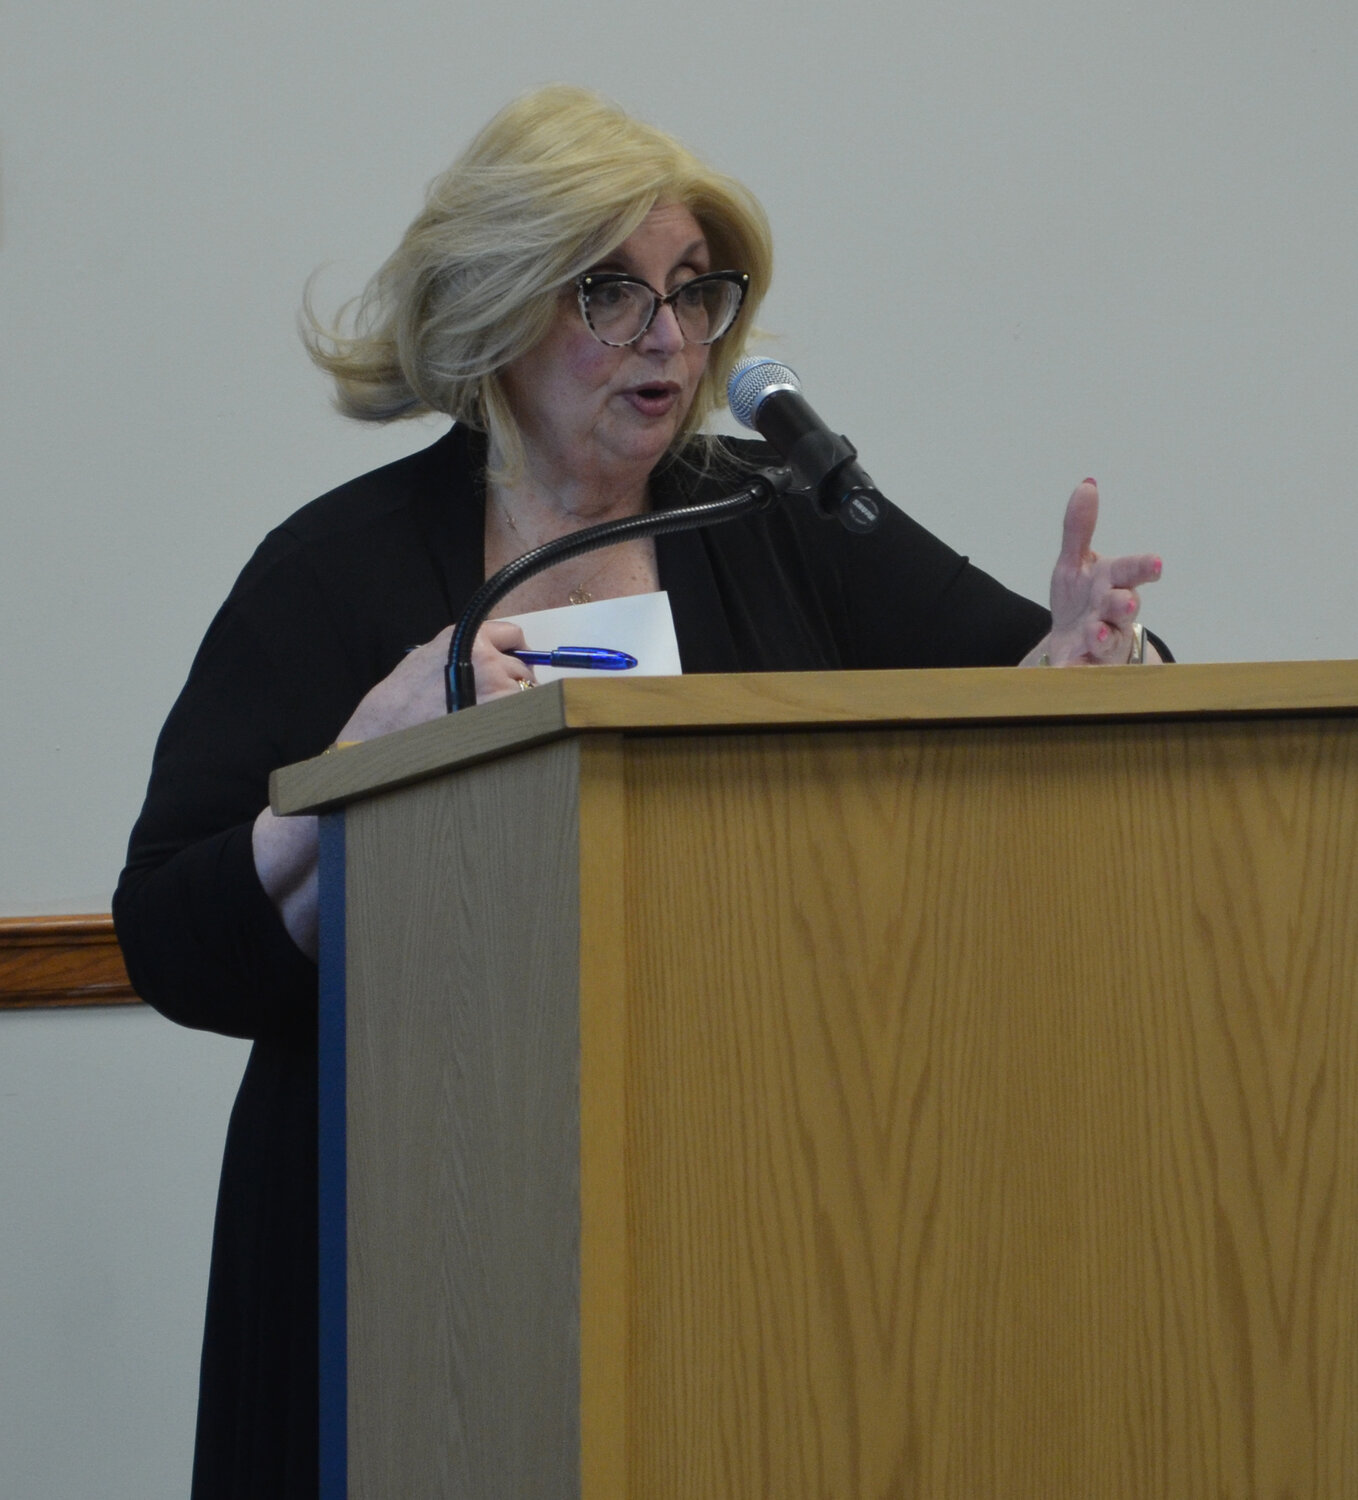 Julie Marchesella, president of the Elmont Chamber of Commerce, said the State of Elmont event is meant to inform the Elmont community of what various organizations are up to.